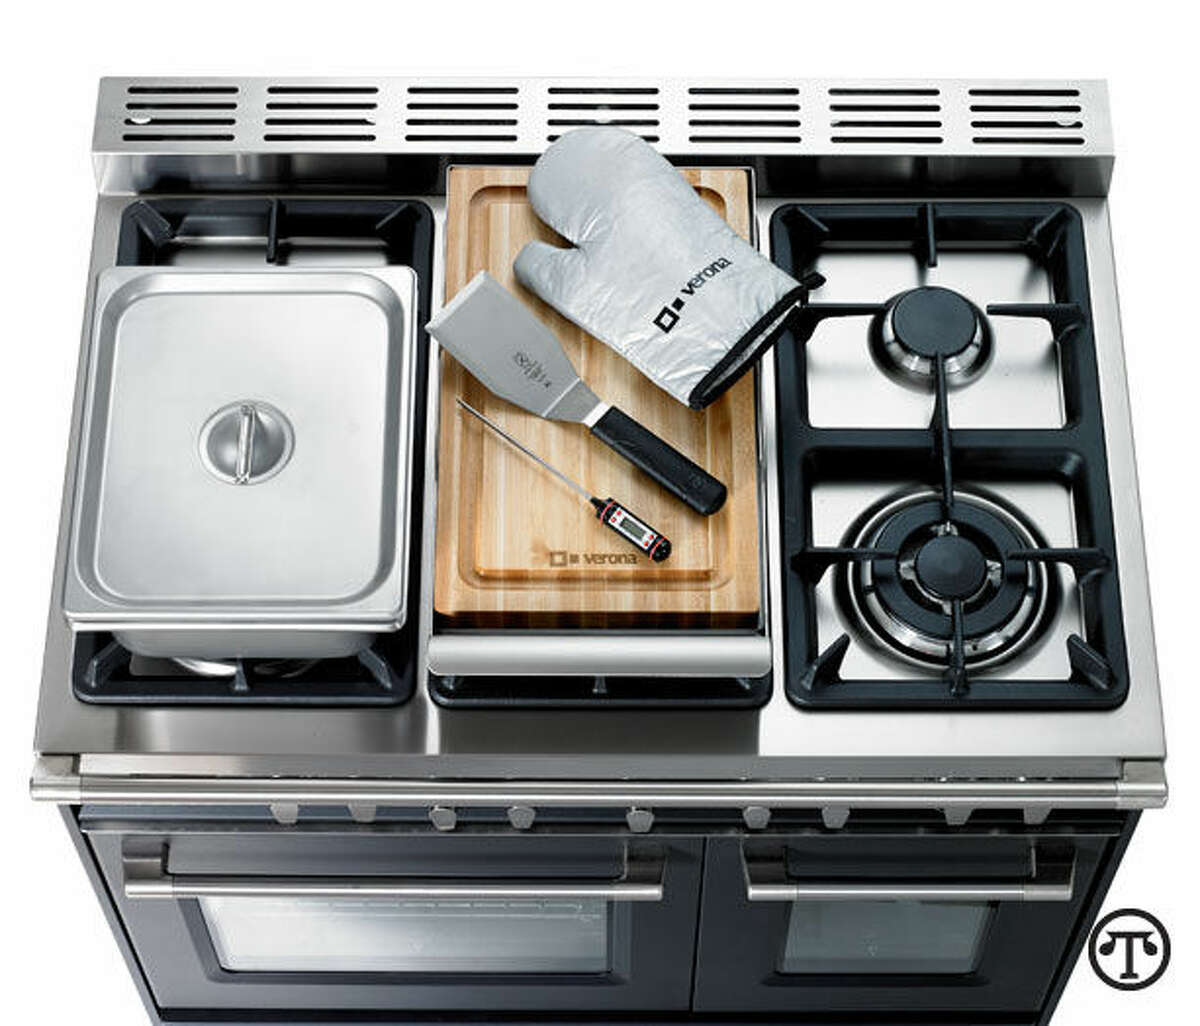 Ranges with a variety of abilities to cook different ways at once are a popular part of many modern kitchens. (NAPS)